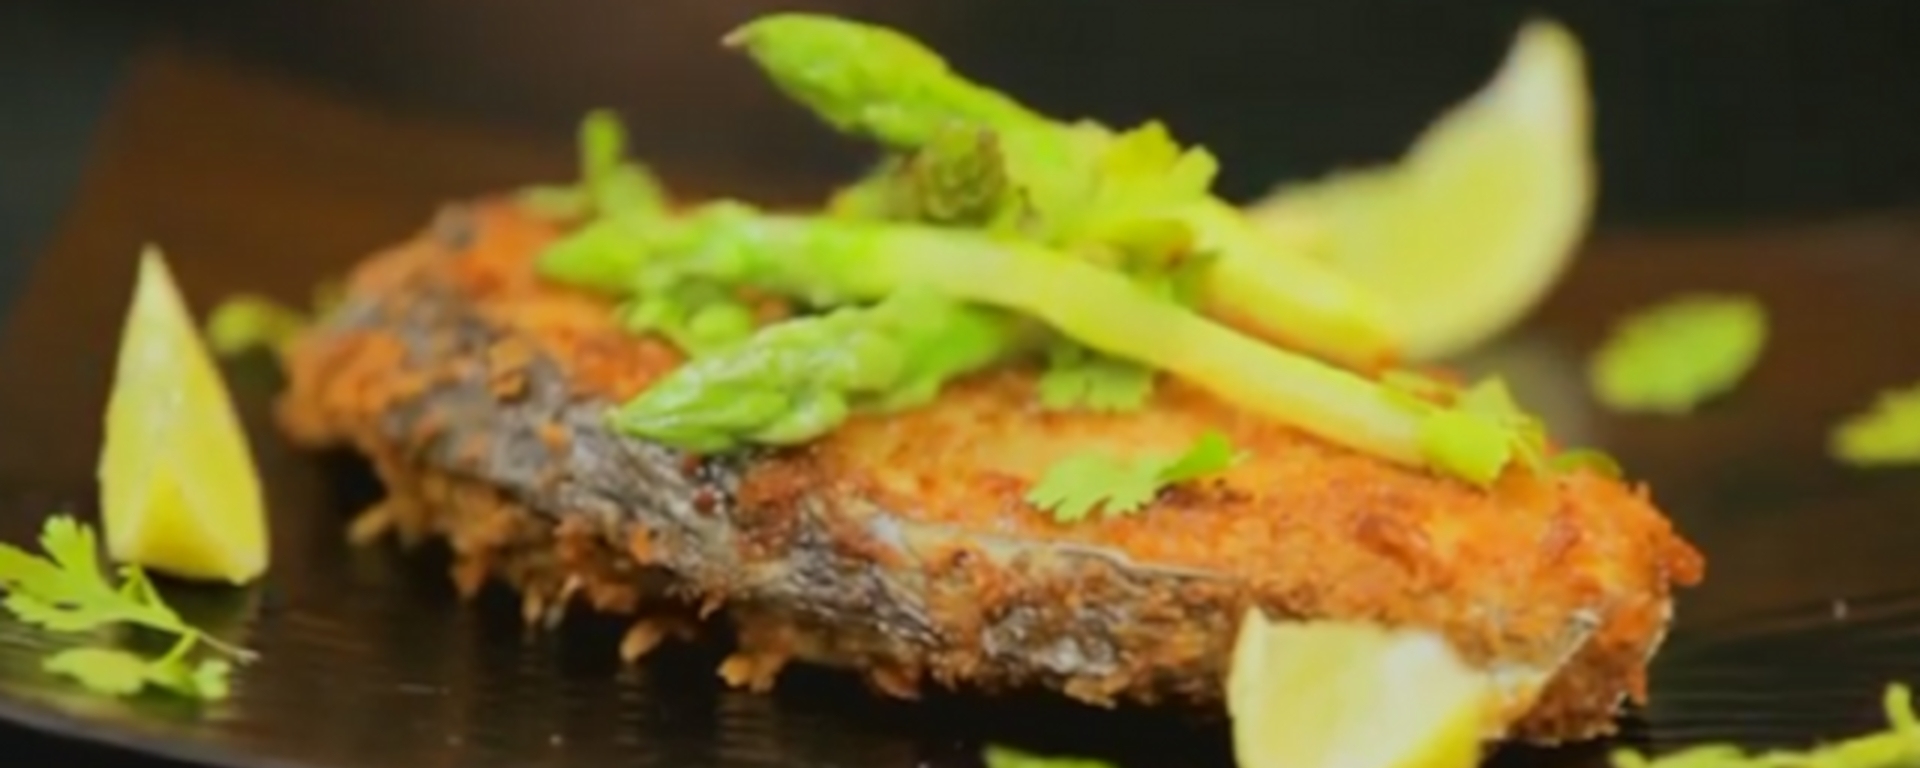 Pan Fried Crumbed Surmai With Asparagus